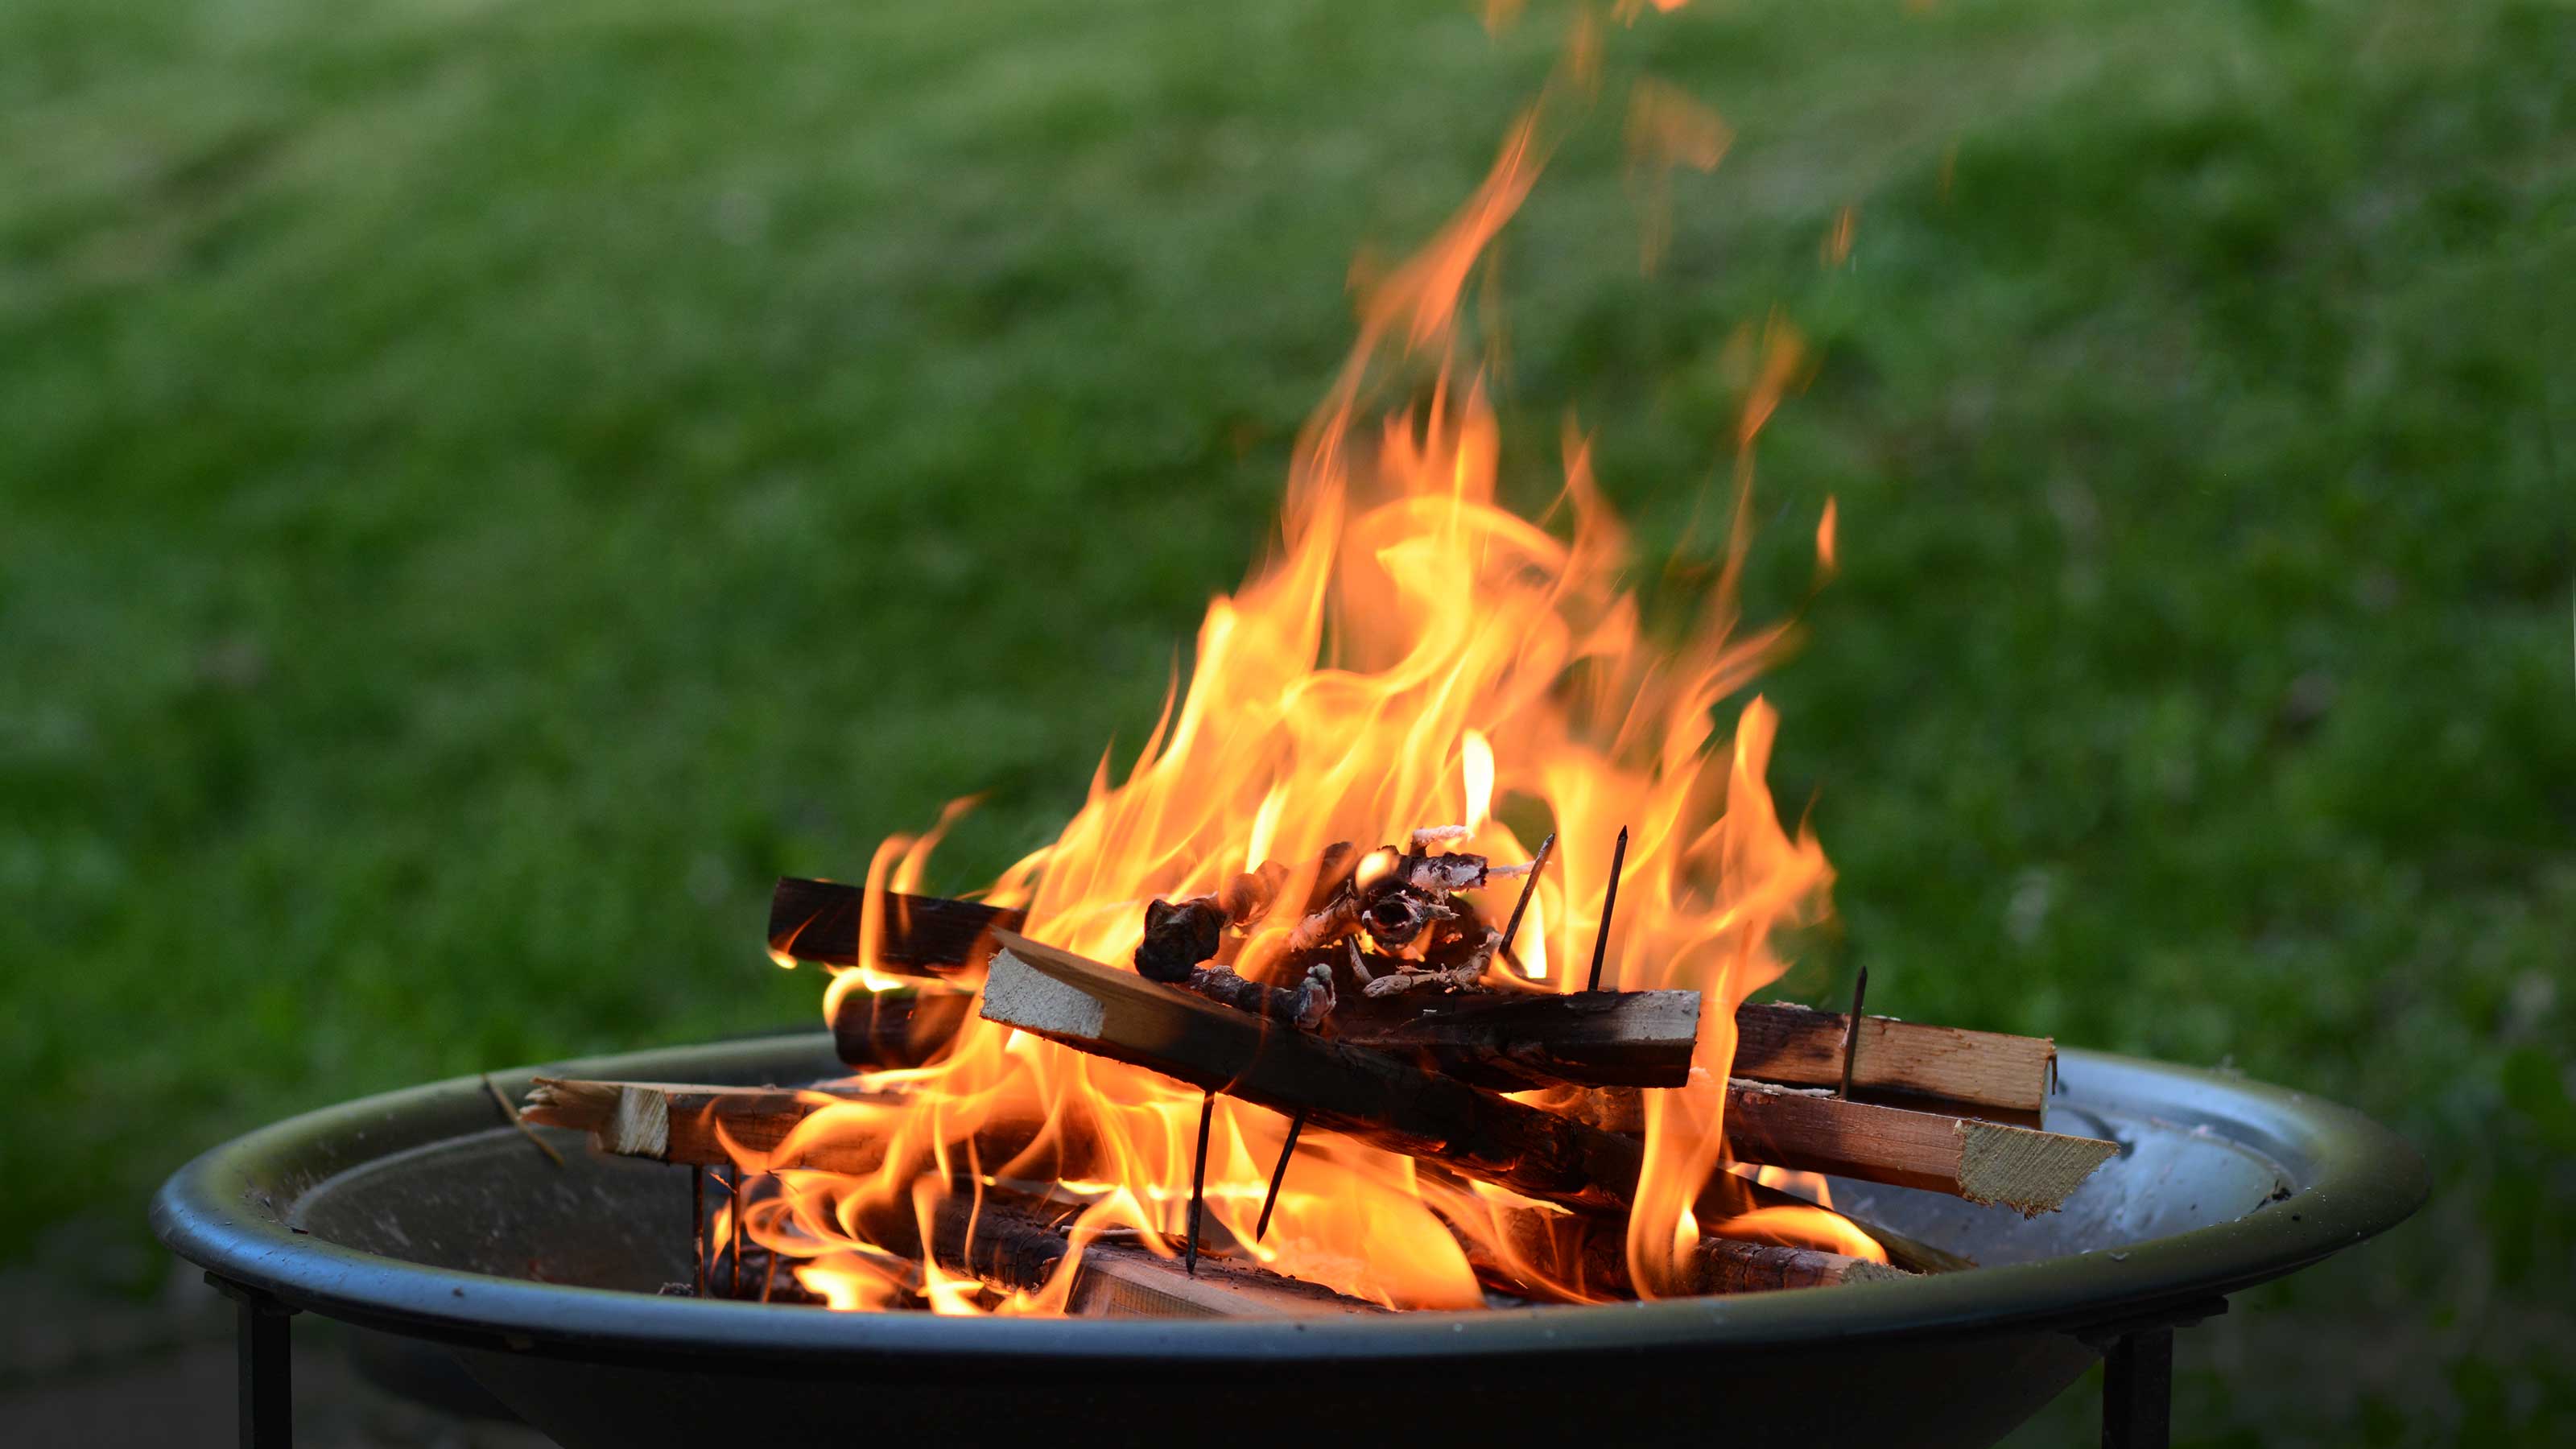 Fire pit safety tips: the expert advice | Gardeningetc